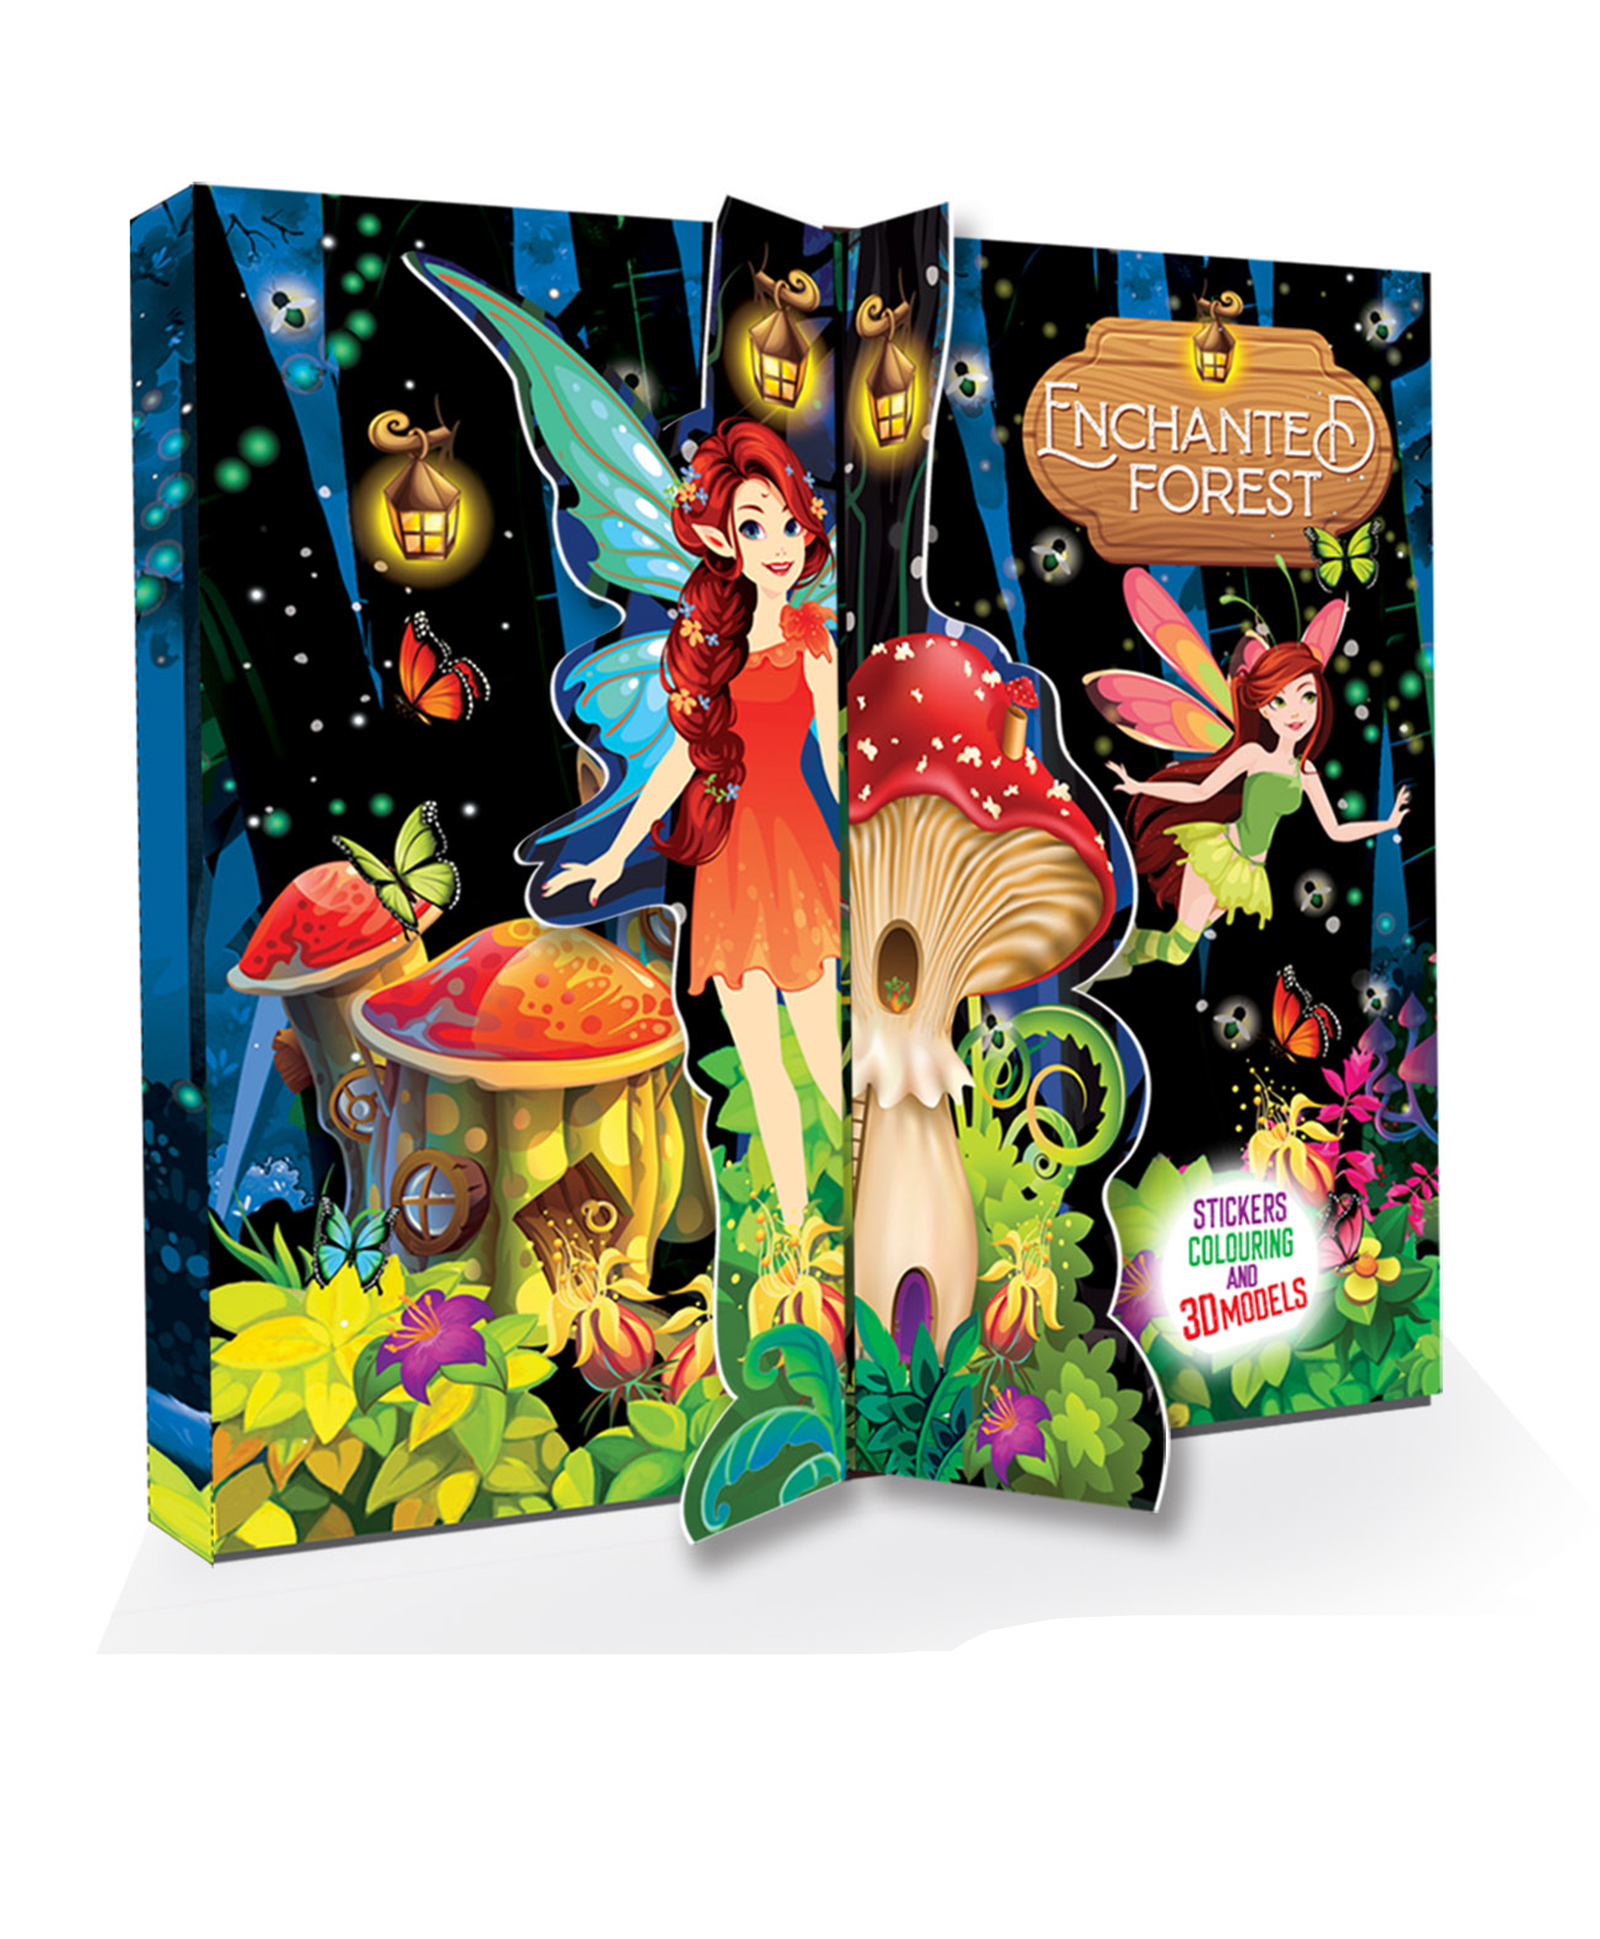 3D Model Kit with Colouring & Sticker Fun to Create Enchanted Forest (Jungle) Scene and Play